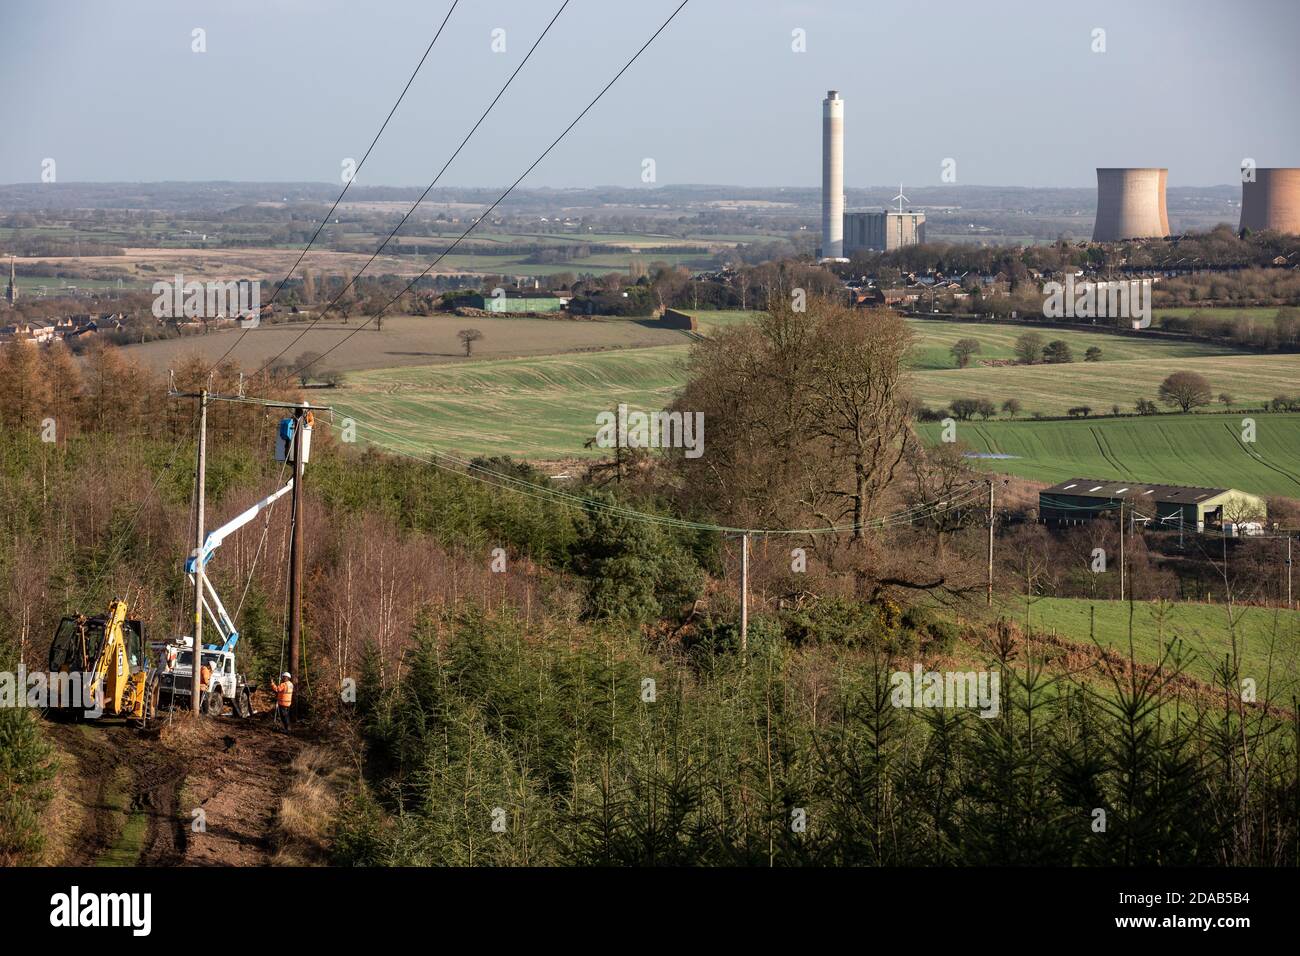 Rugeley Power Station in Staffordshire on the horizon with Electricity Power workers in the foreground on the edge of Cannock Chase Stock Photo